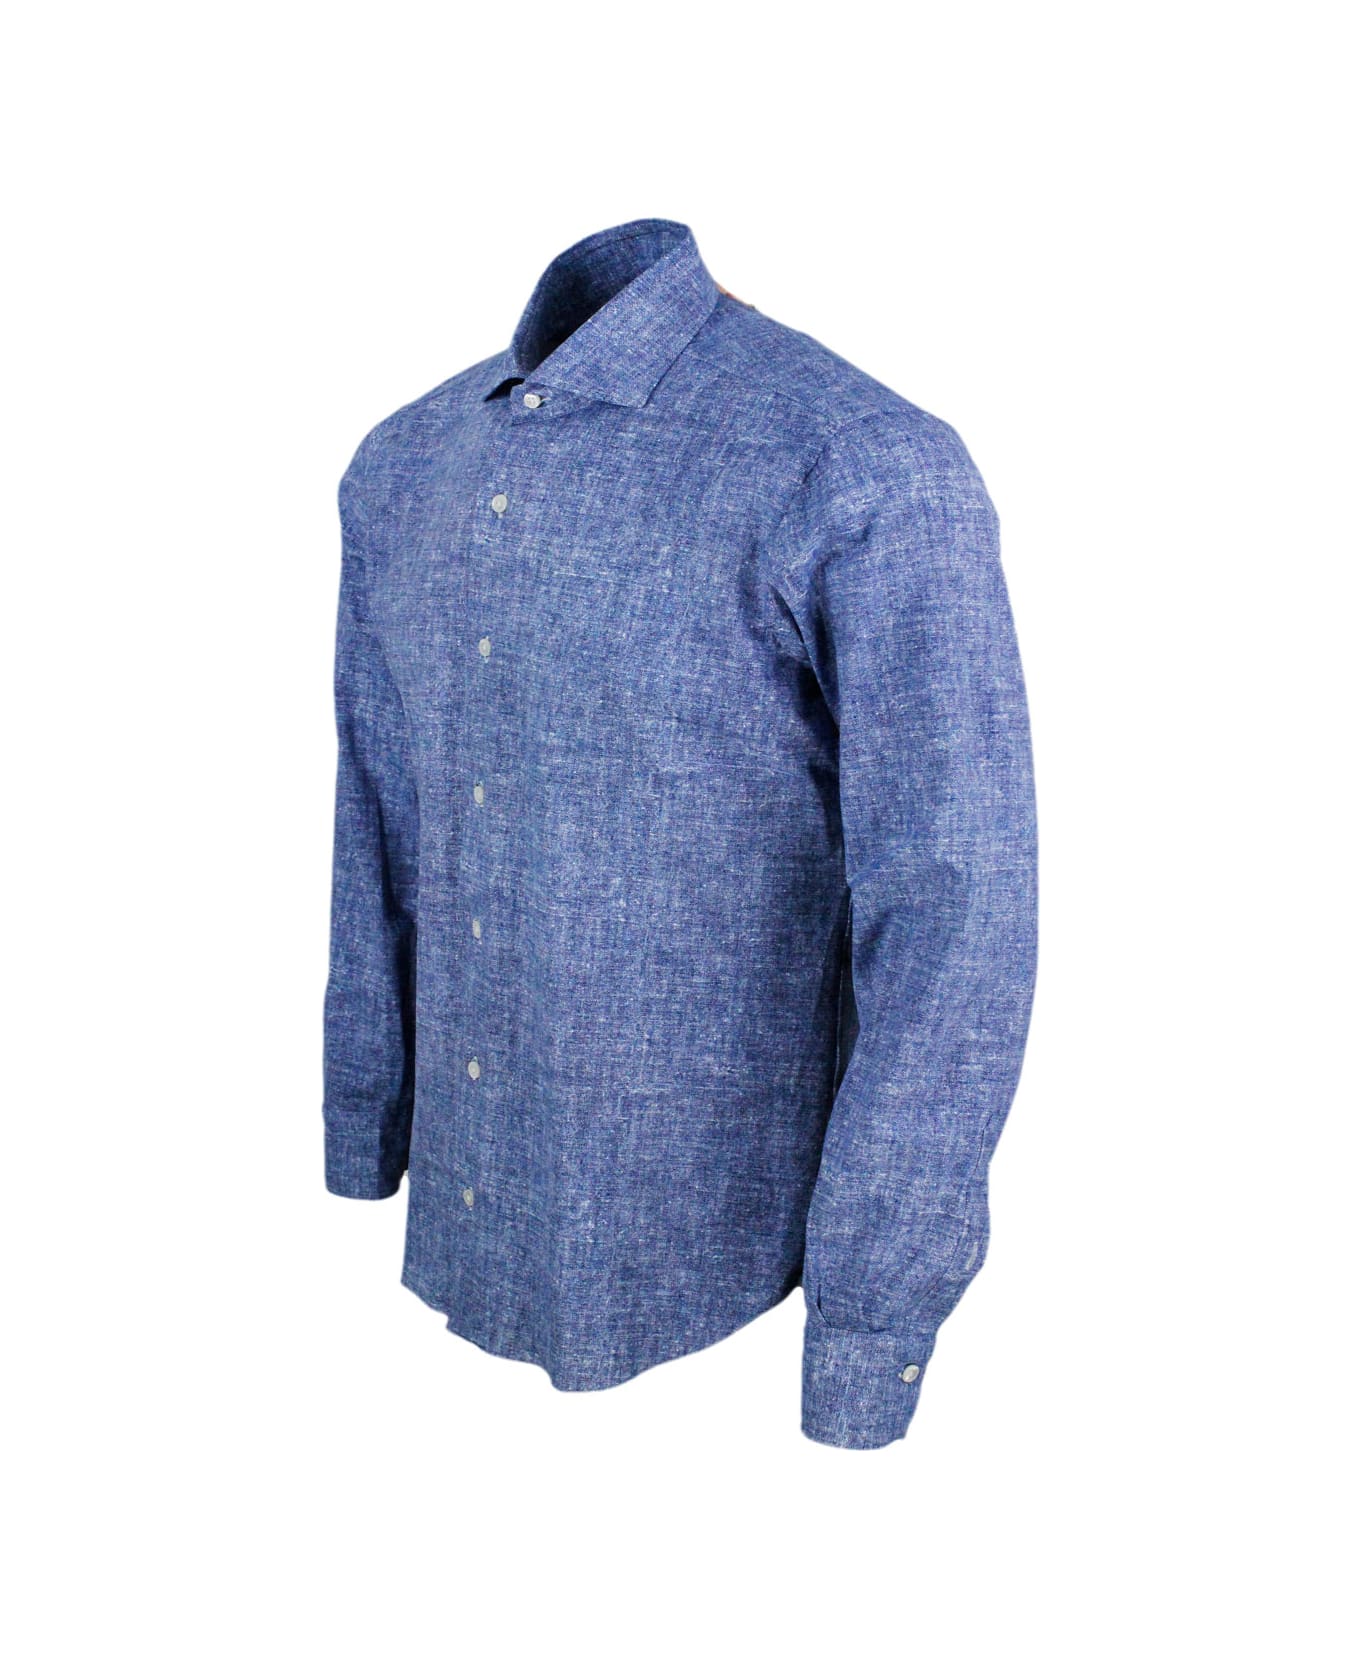 Barba Napoli Cult Shirt In Super Stretch In Denim Melange Color With Mother-of-pearl Buttons And Italian Collar - Denim